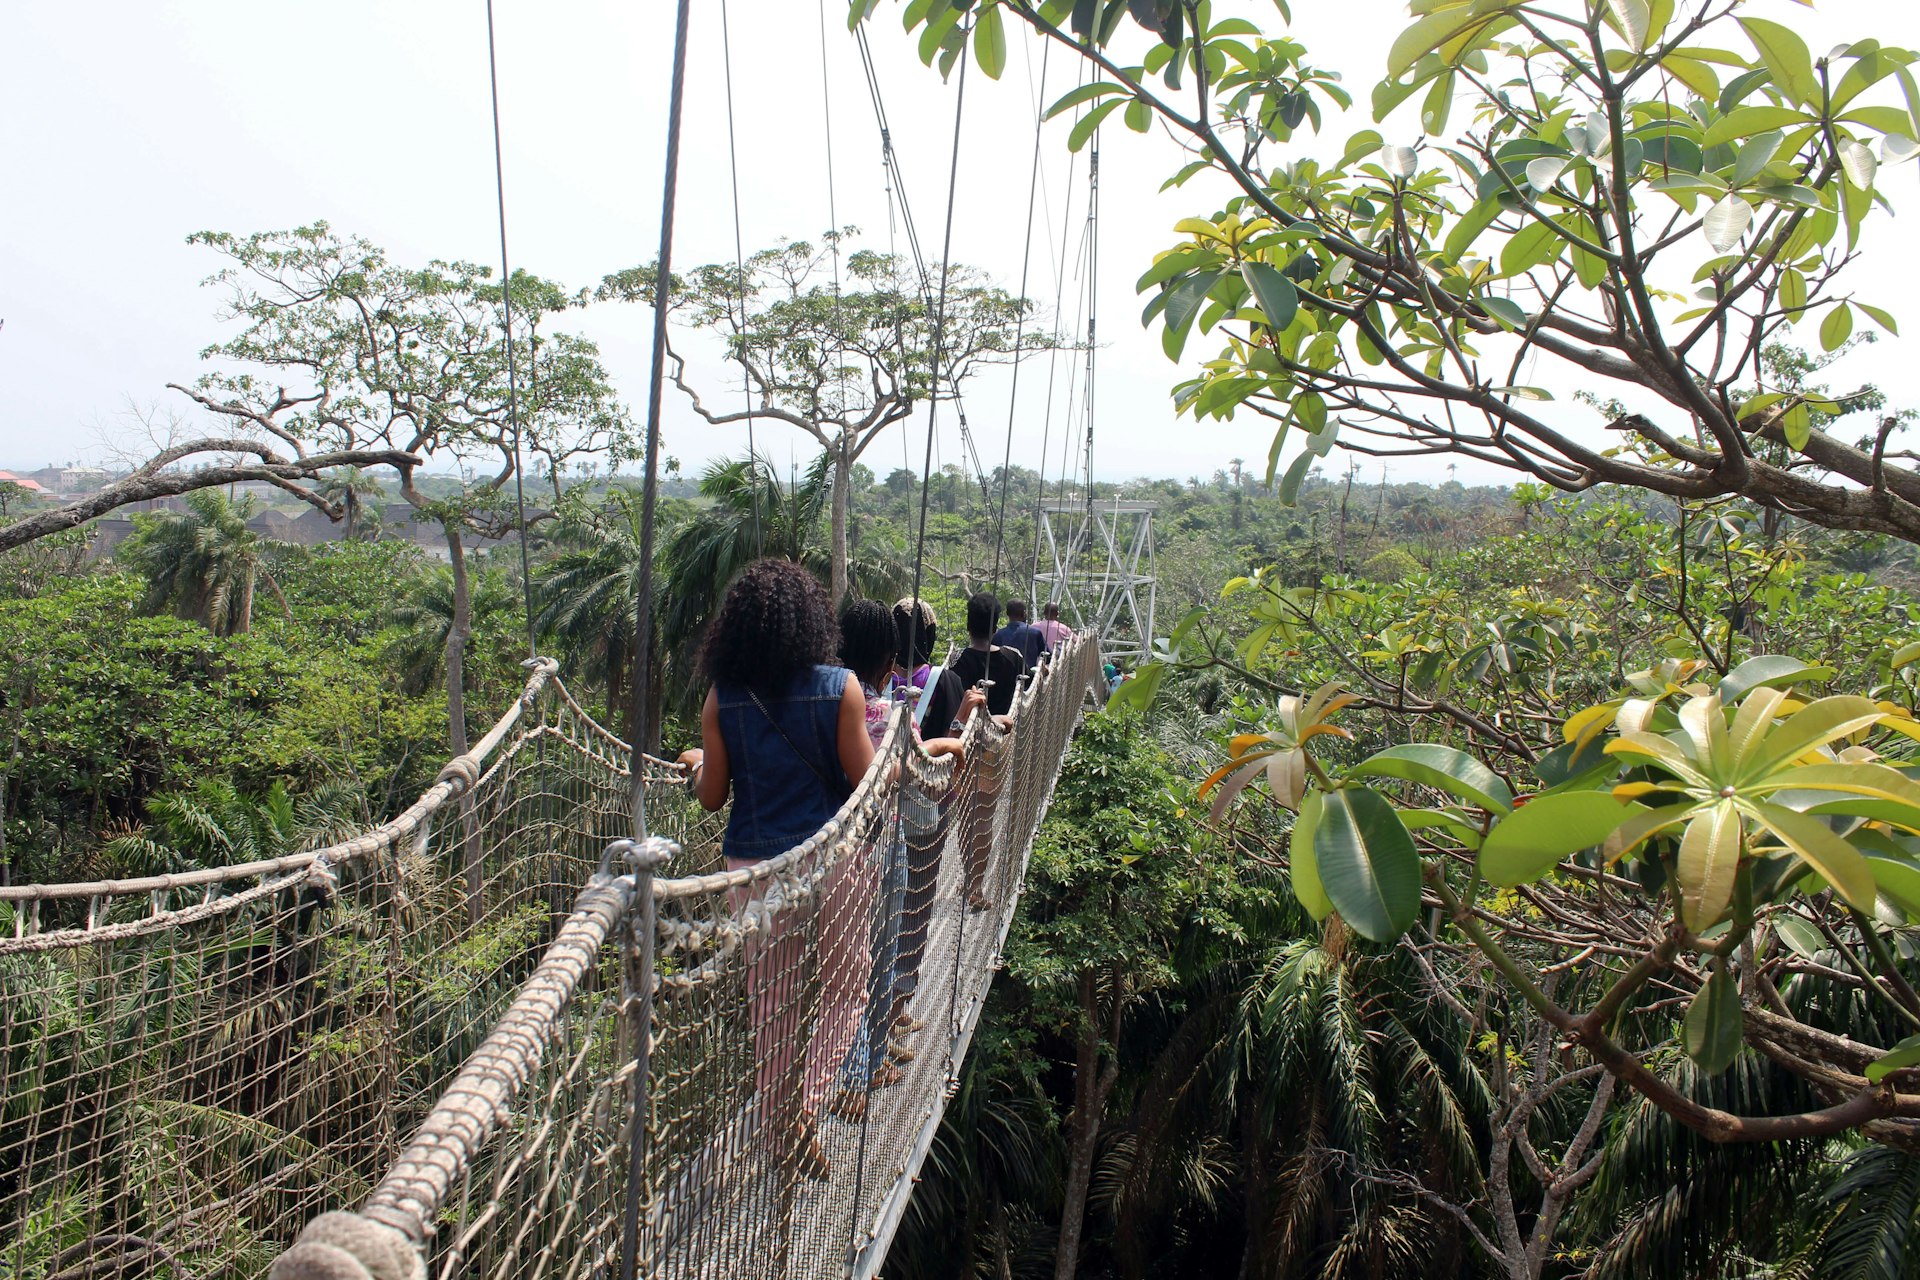 Thrill seekers atop the Africa's longest canopy walkway at Lekki Conservation Center